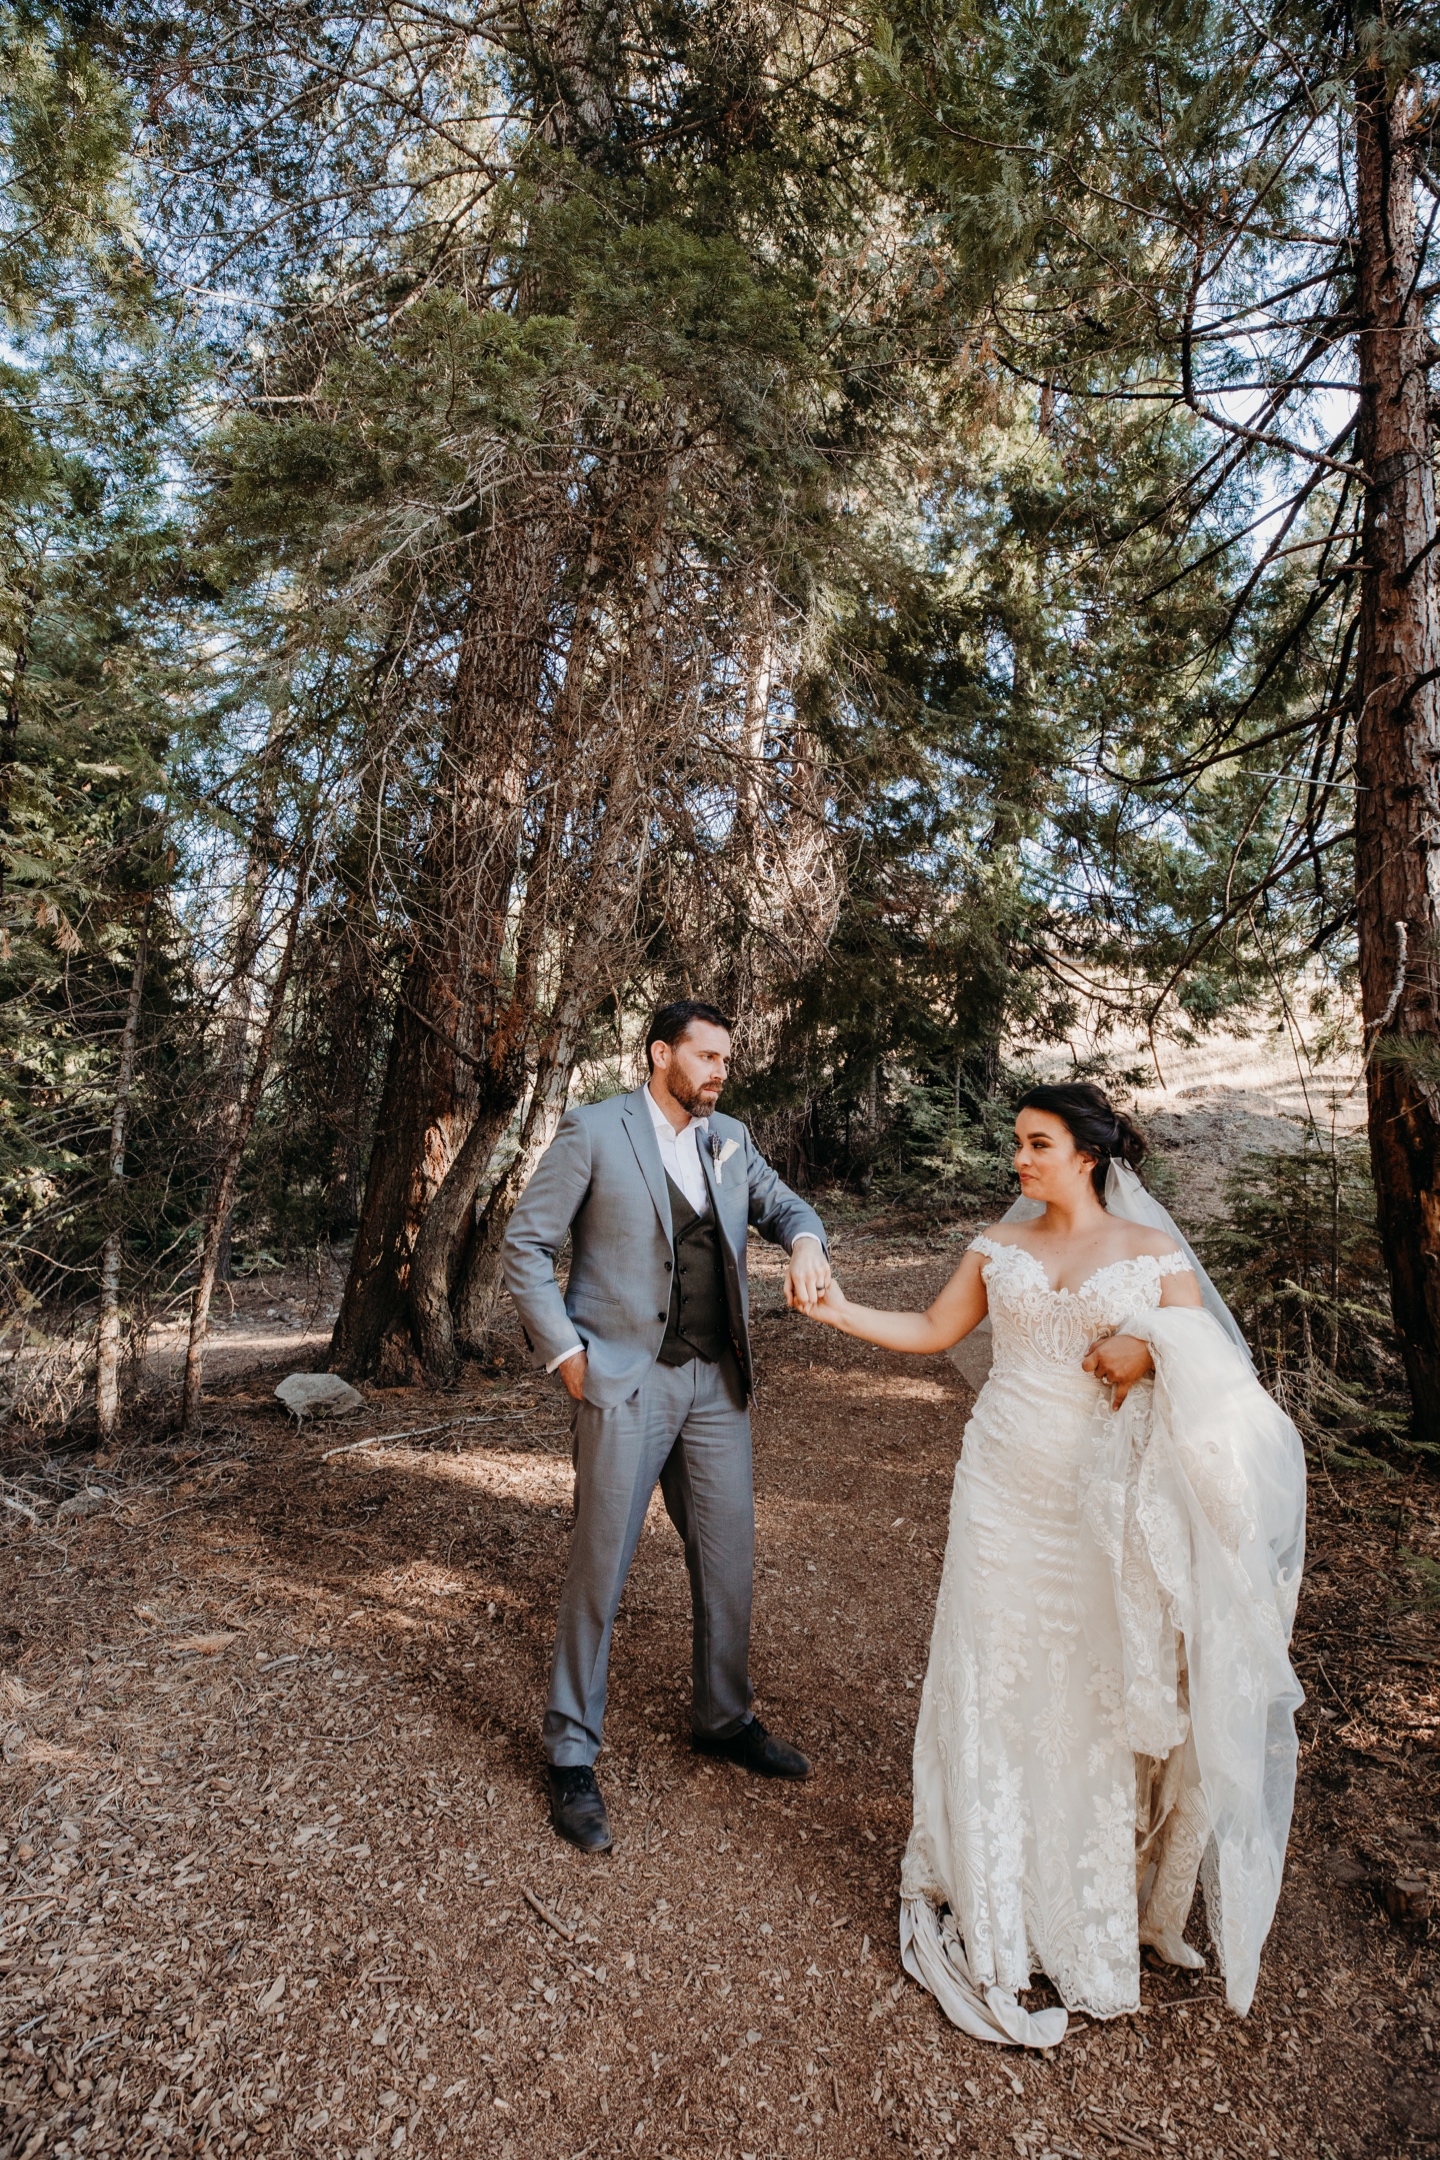 Bride leads groom by the hand down a trail in Yosemite surrounded by Pine trees.